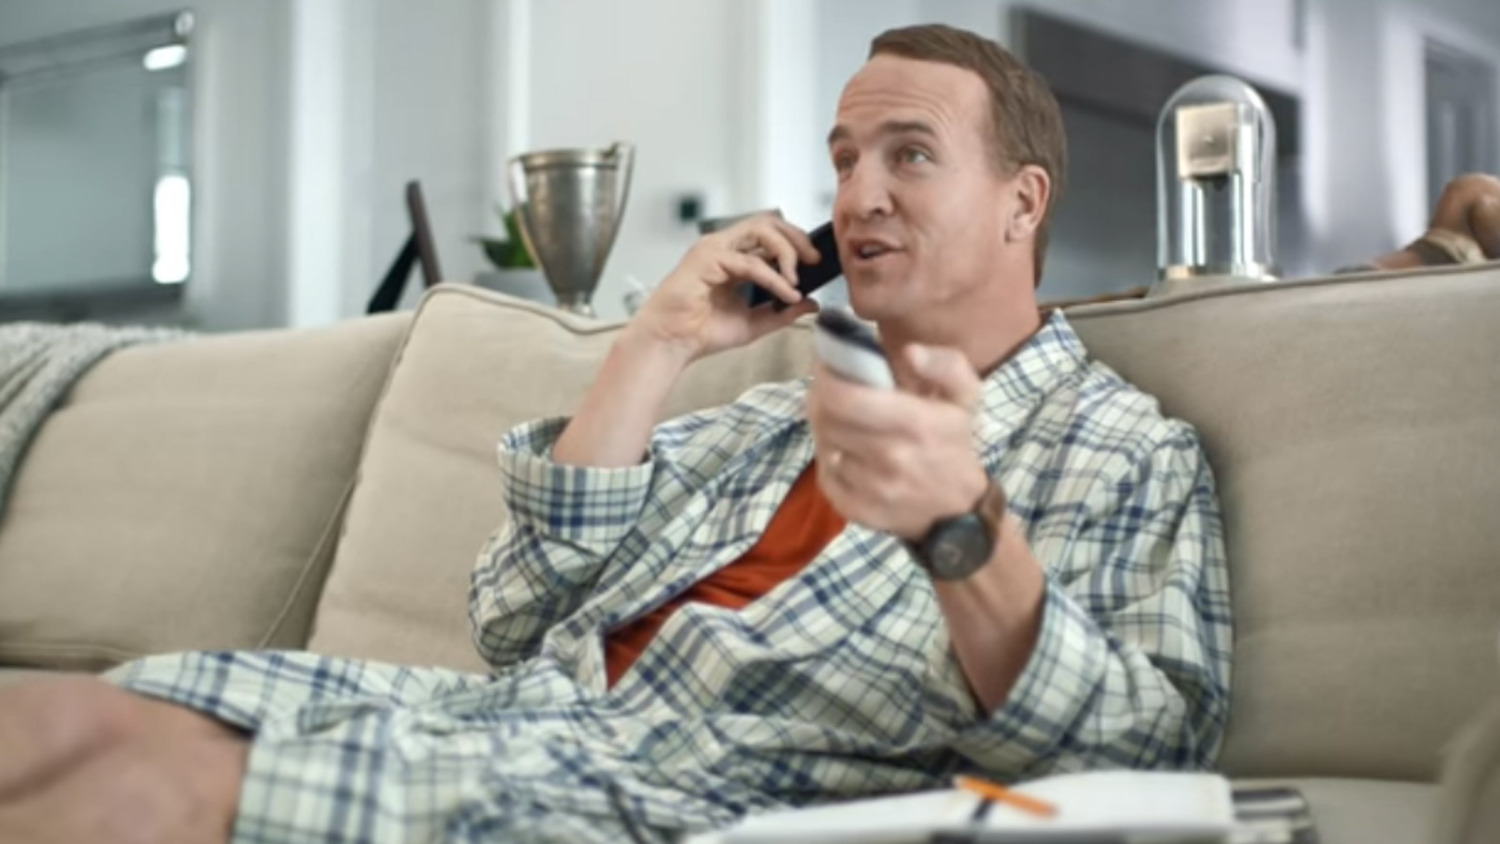 Peyton Manning has a lot of time on his hands in retirement